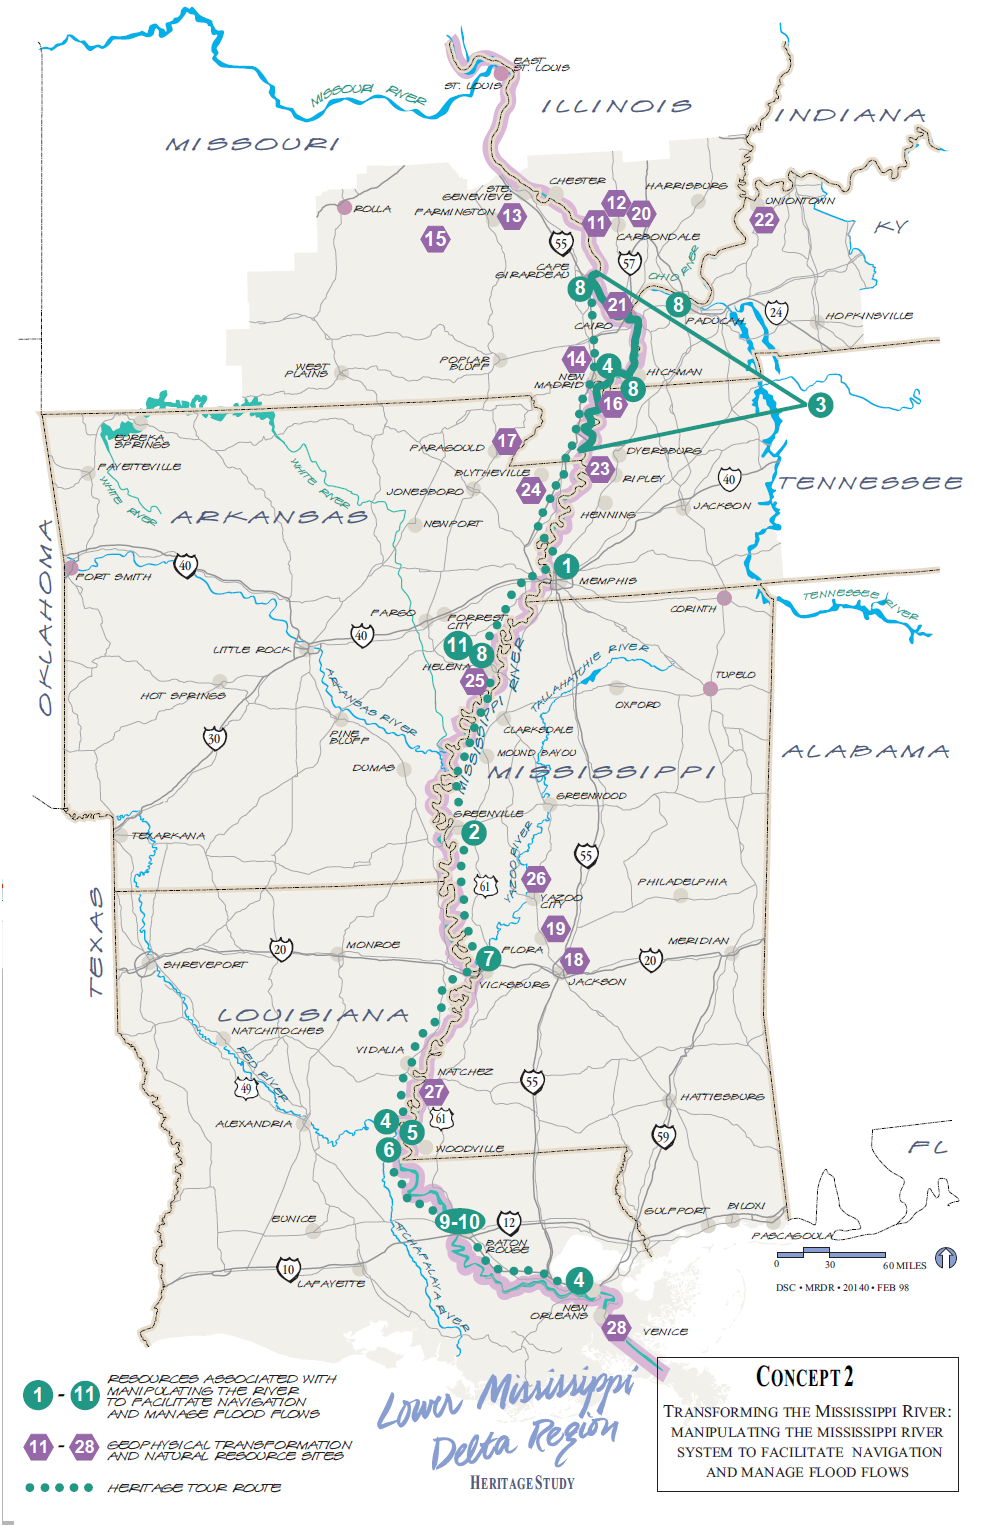 Map of sites related to the human transformation of the Mississippi river